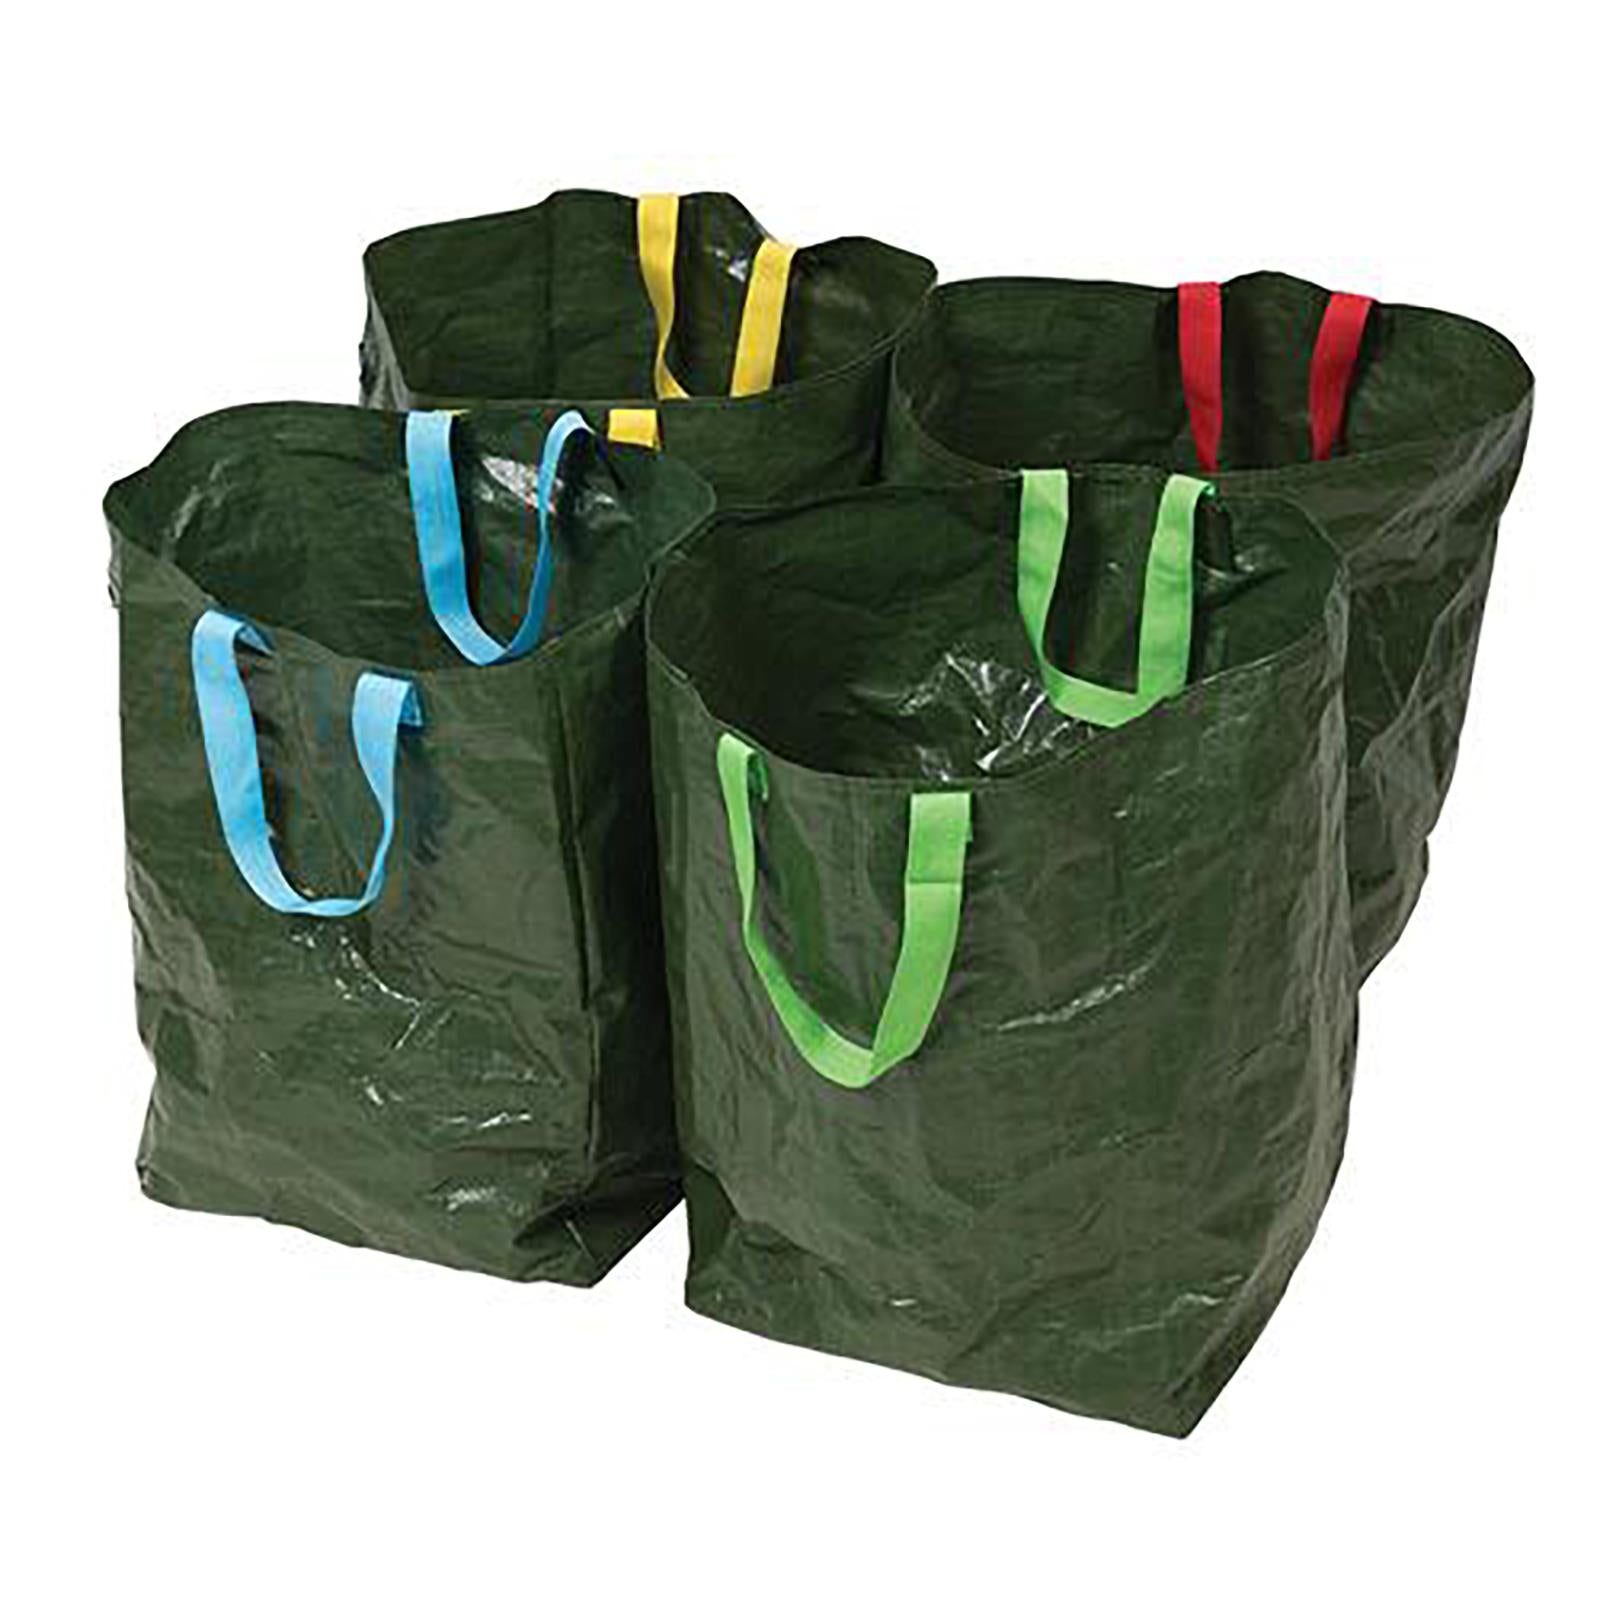 Silverline Recycling Bags 4 Pack 400 x 320 x 320mm